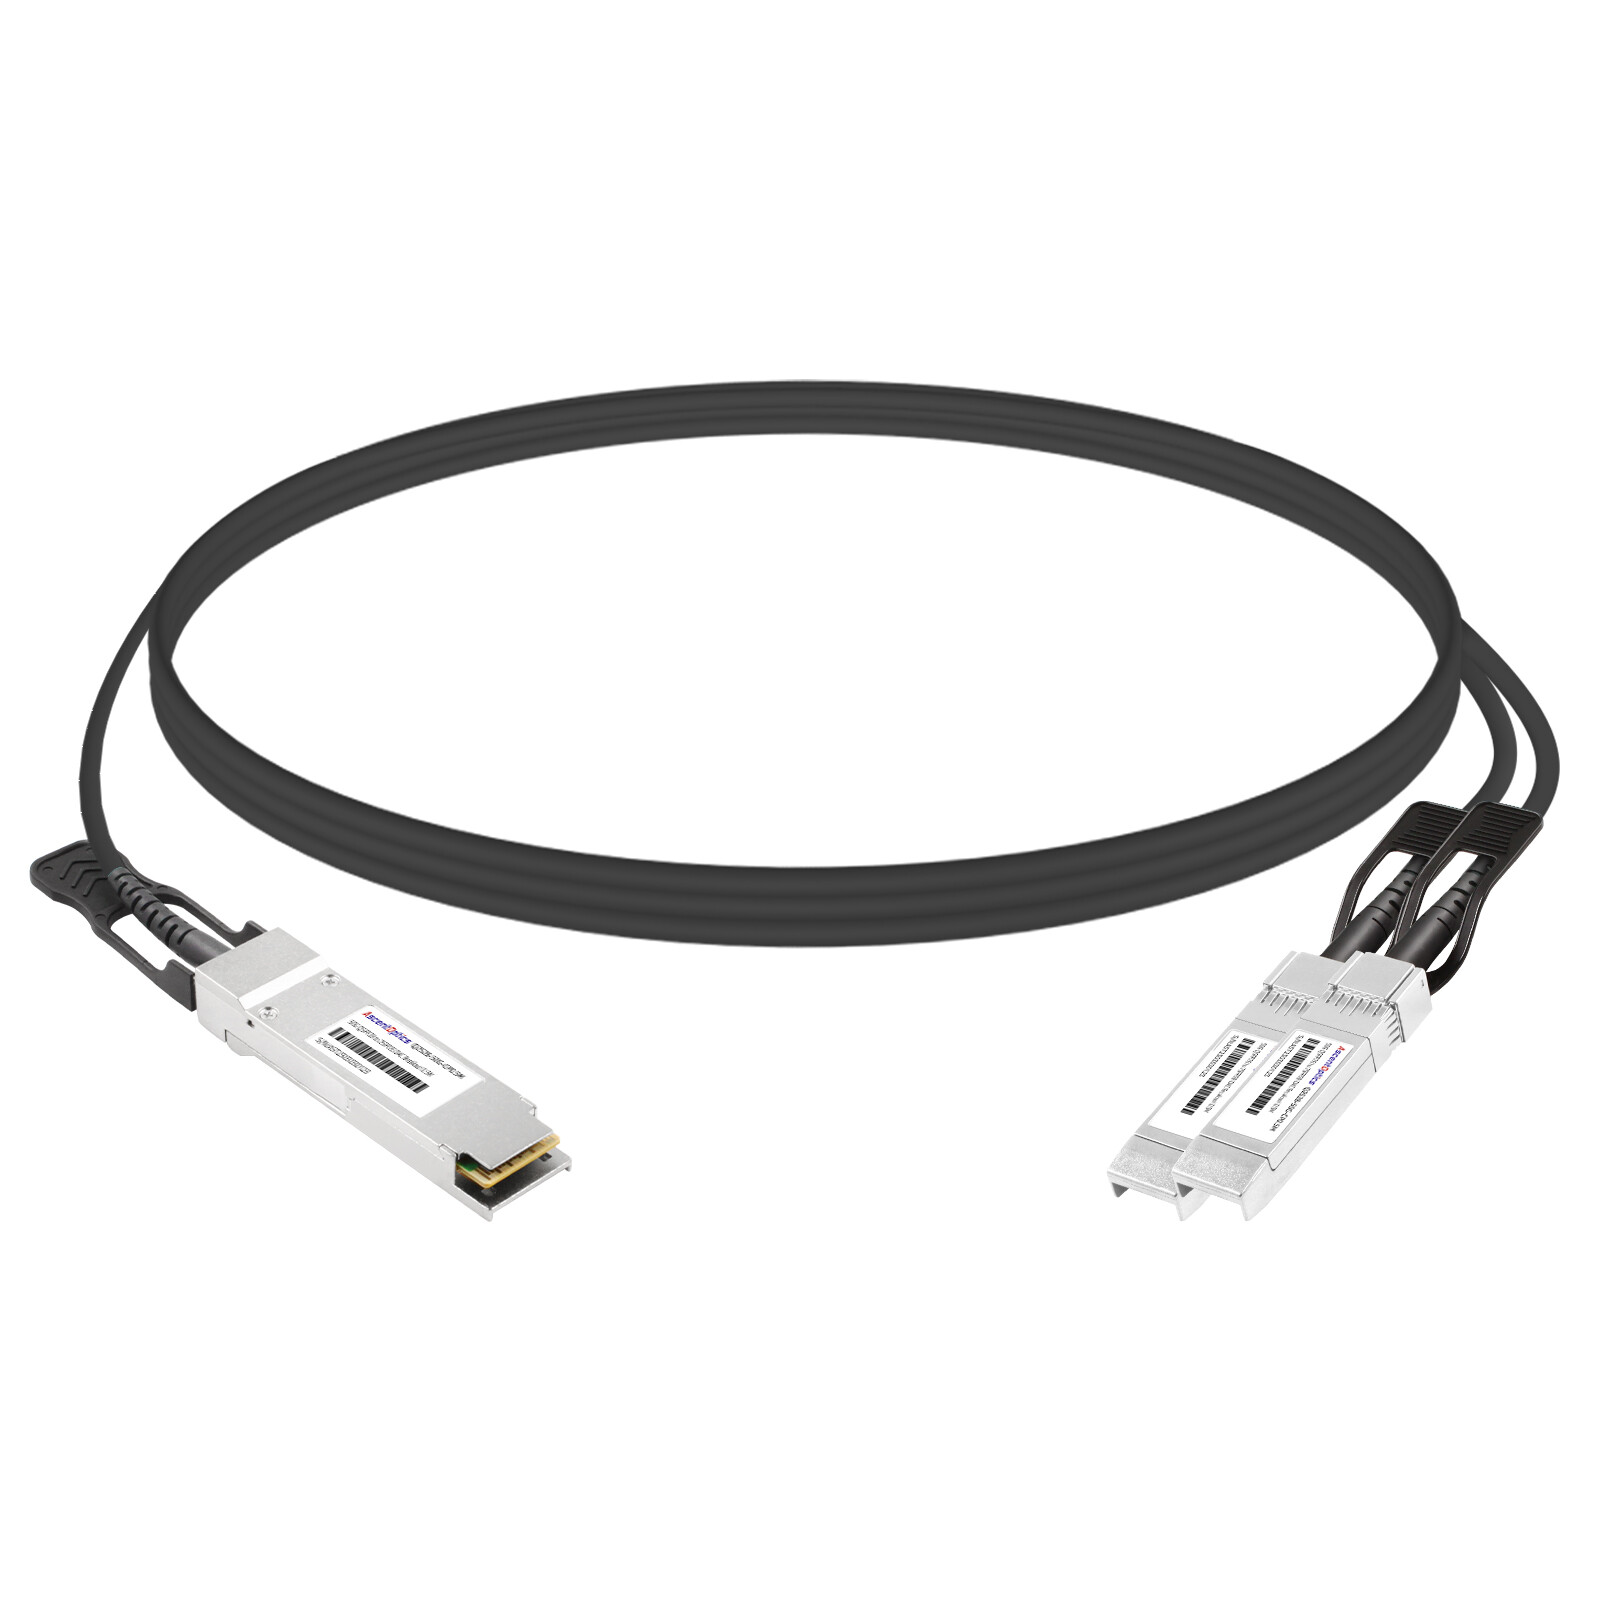 50G DSFP to 2x 25G SFP28 Copper Breakout Cable,5 Meters,Passive